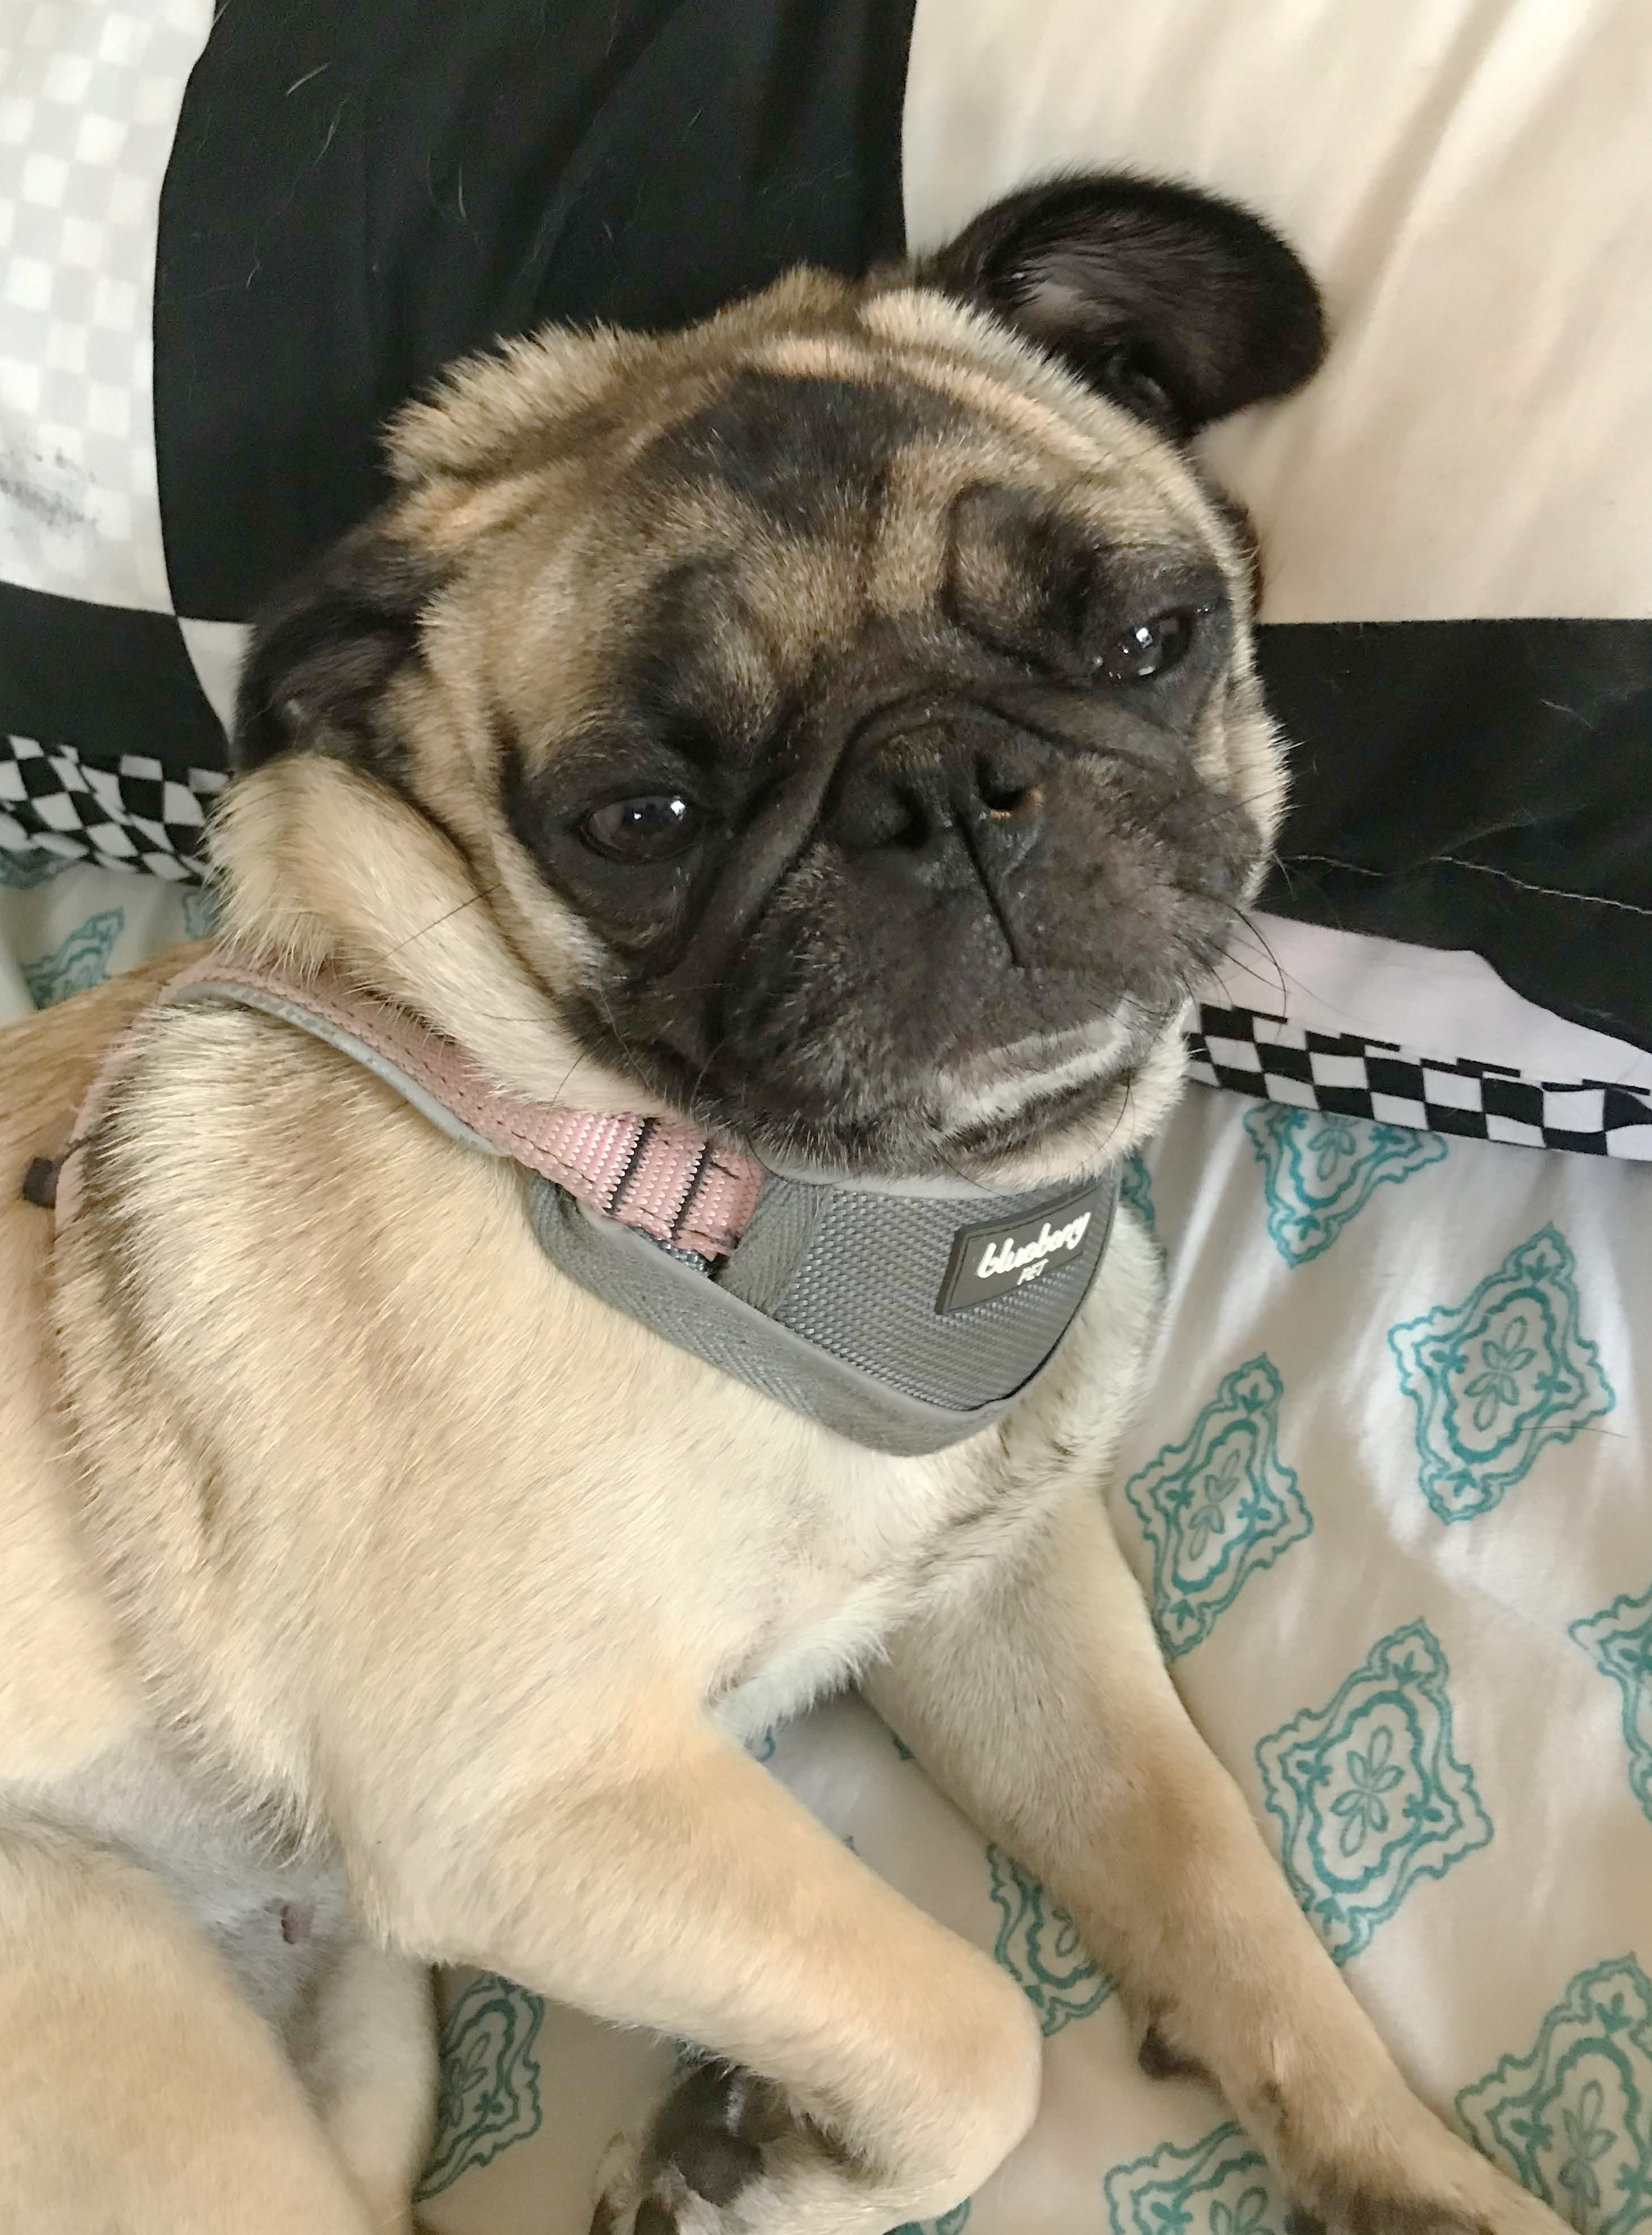 What Do I Do for my Pug’s Separation Anxiety?